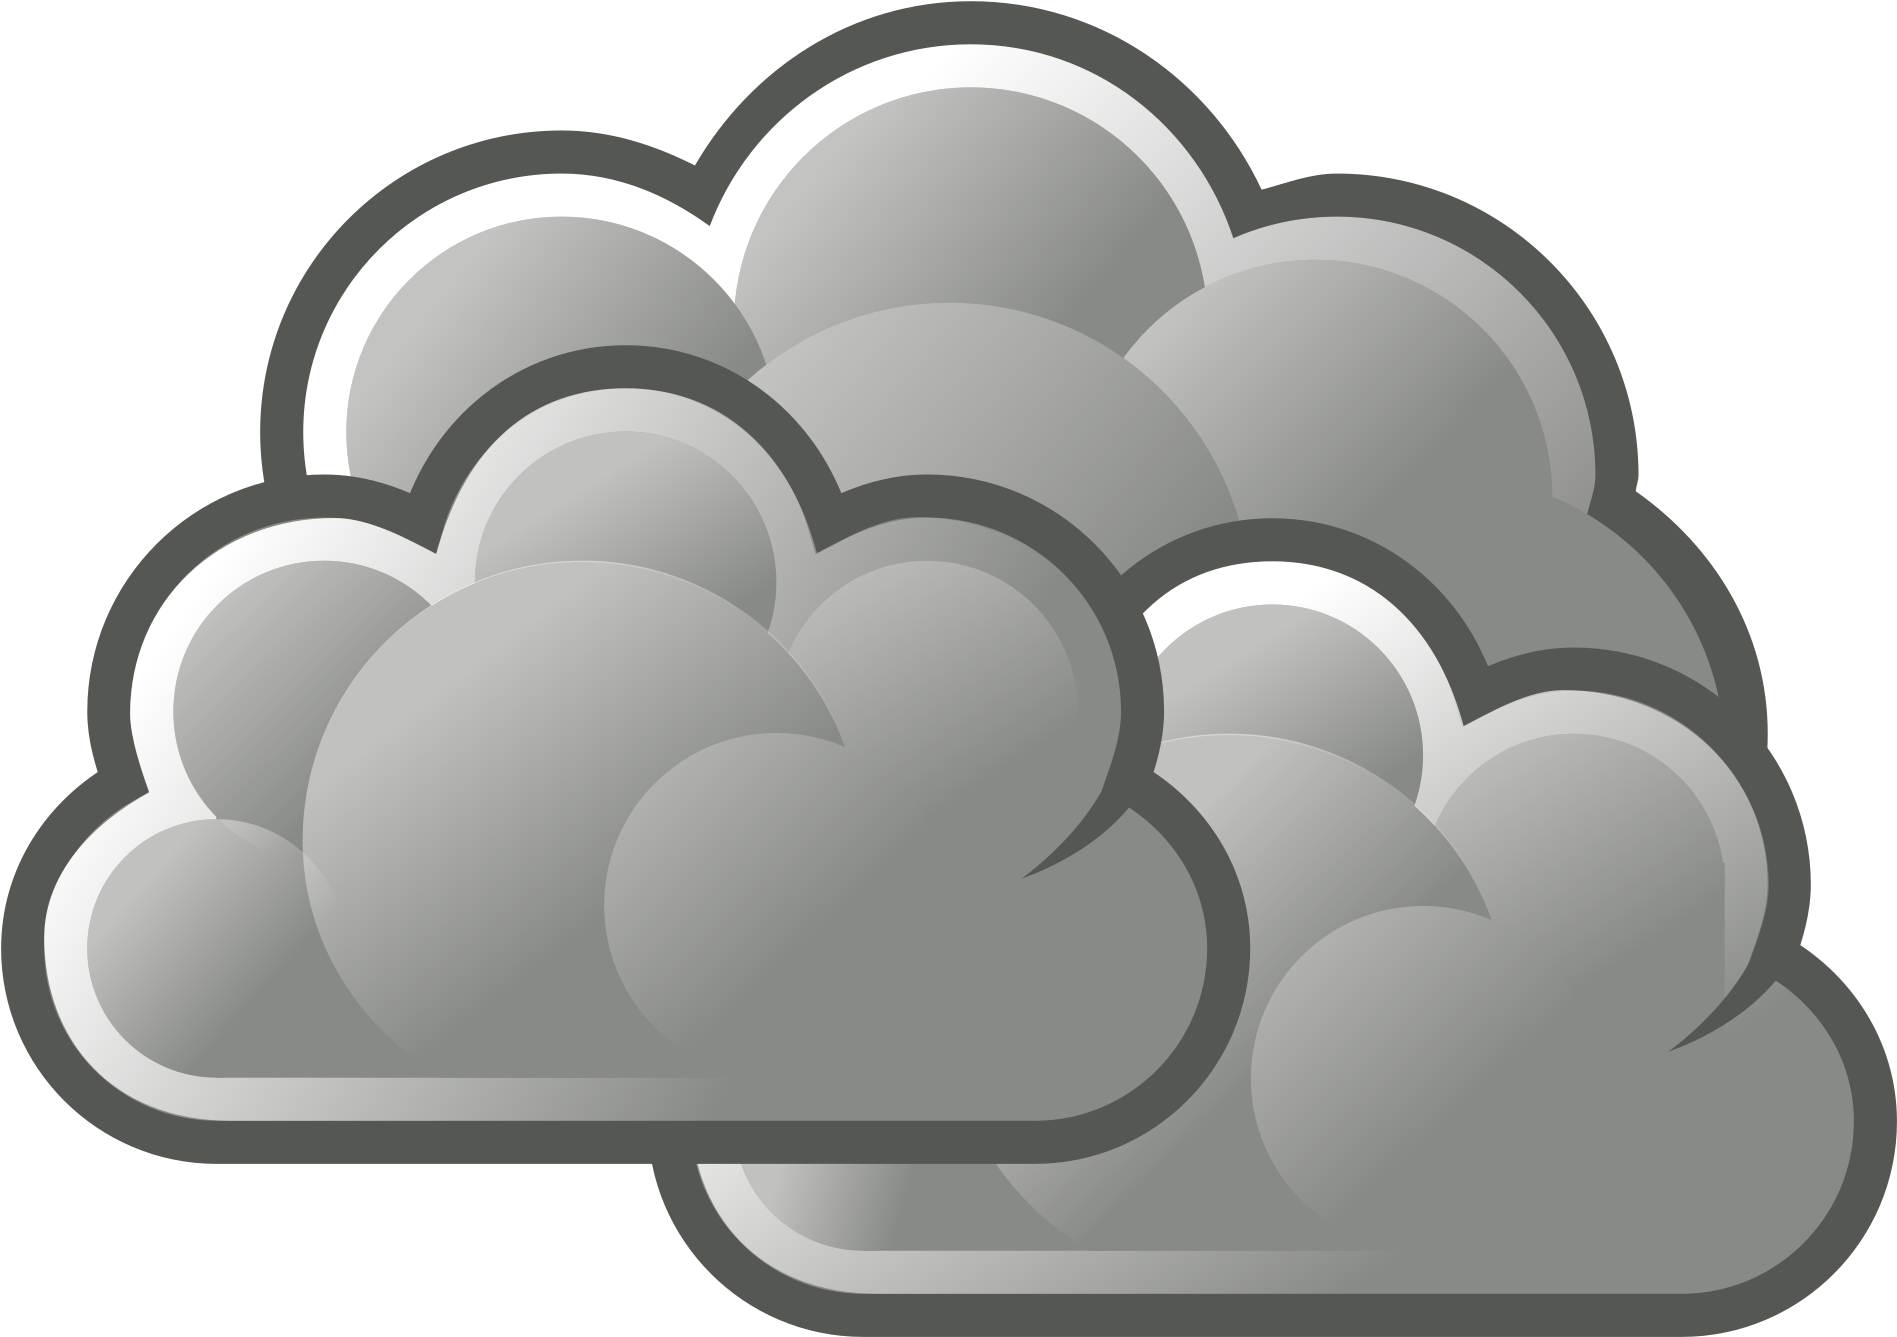 Open - Cloudy Clipart clipart image... 